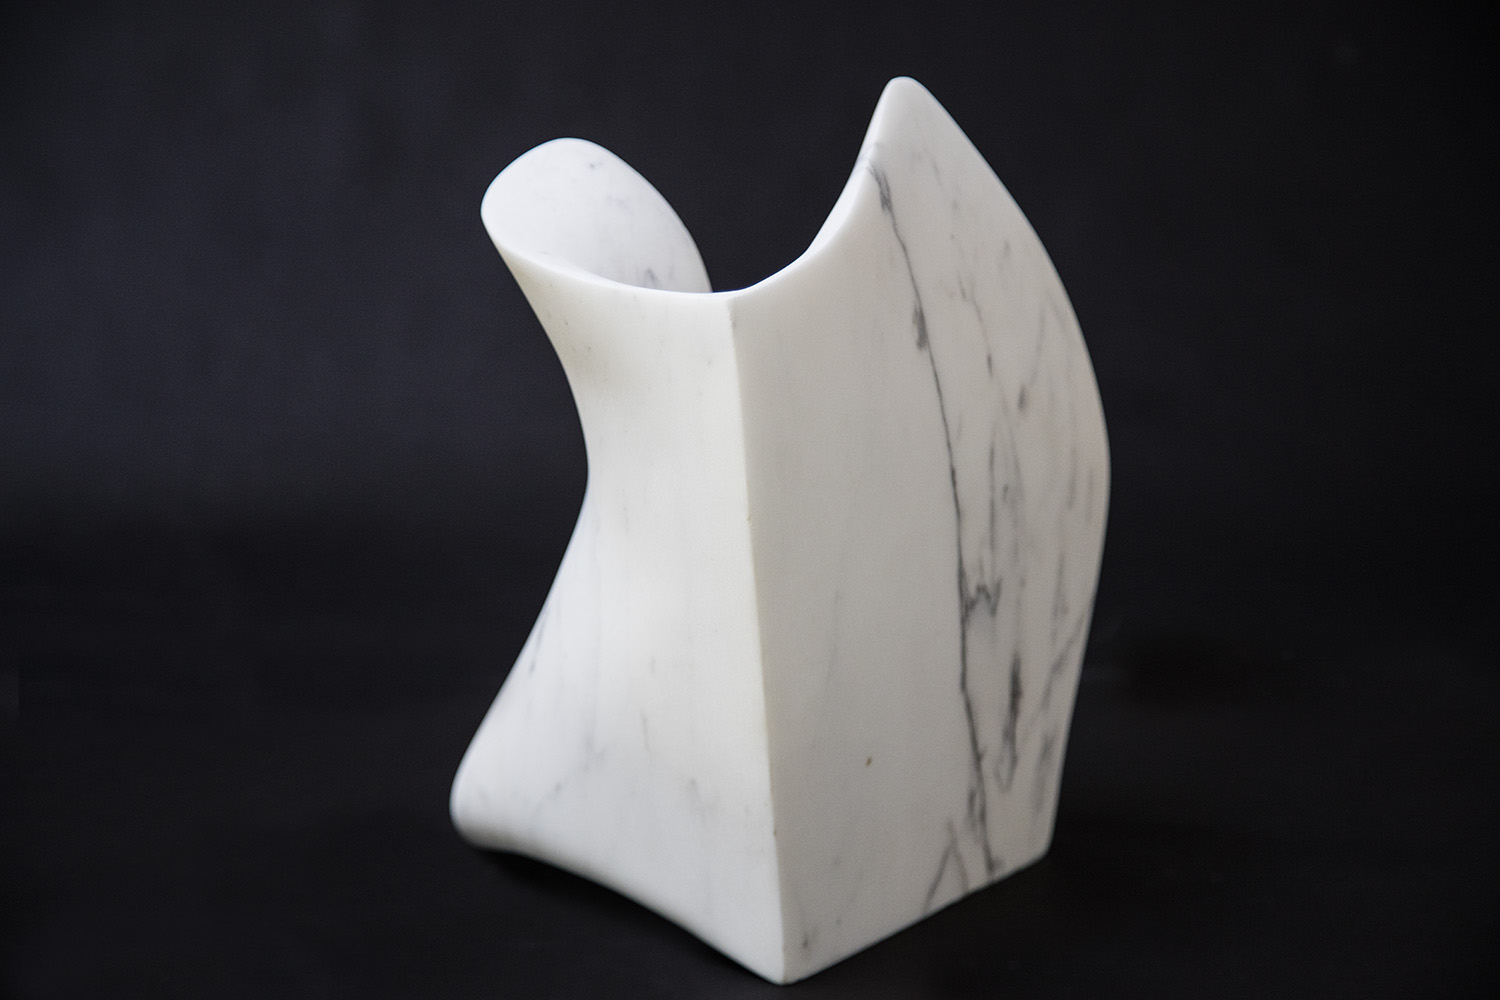 Fred and Ginger (Back), marble, 10.5" x 10" x 7", 2015